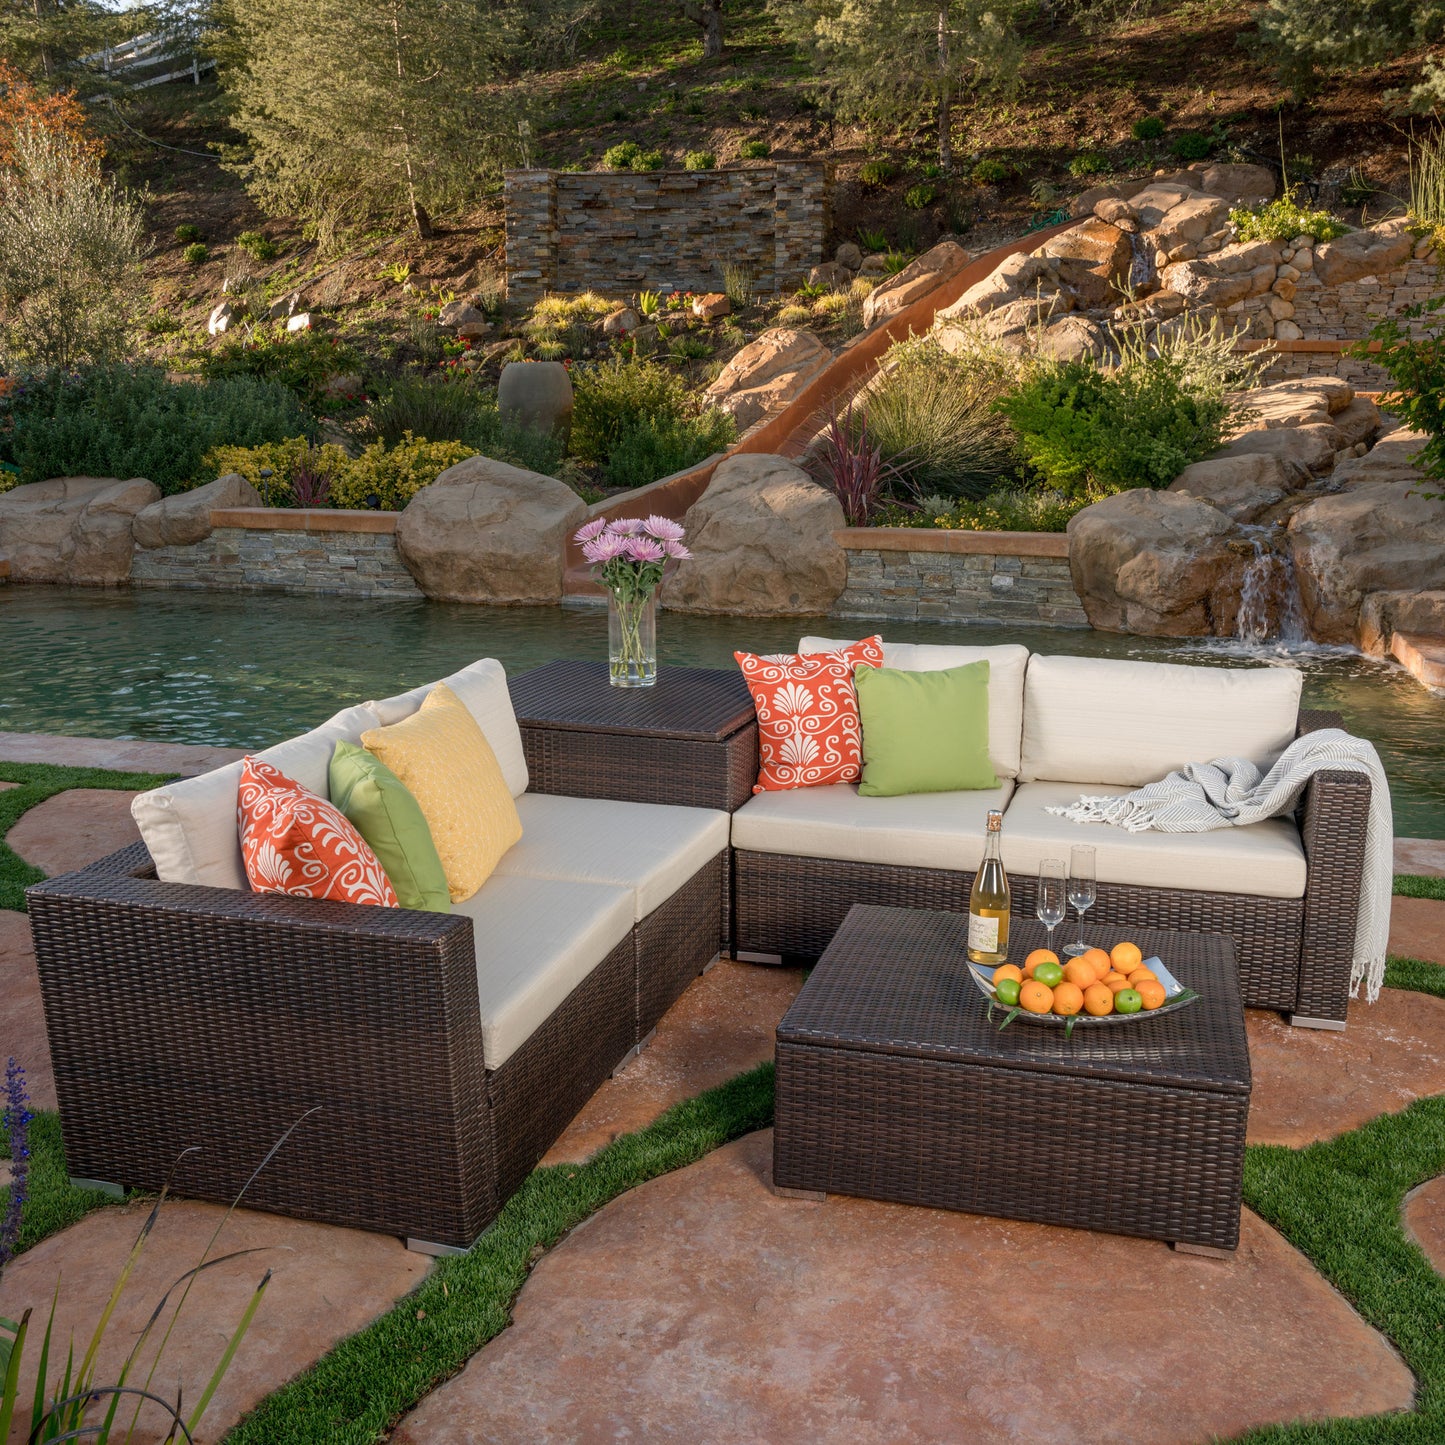 Francisco 6pc Outdoor Wicker Sectional Sofa Set w/ Cushions